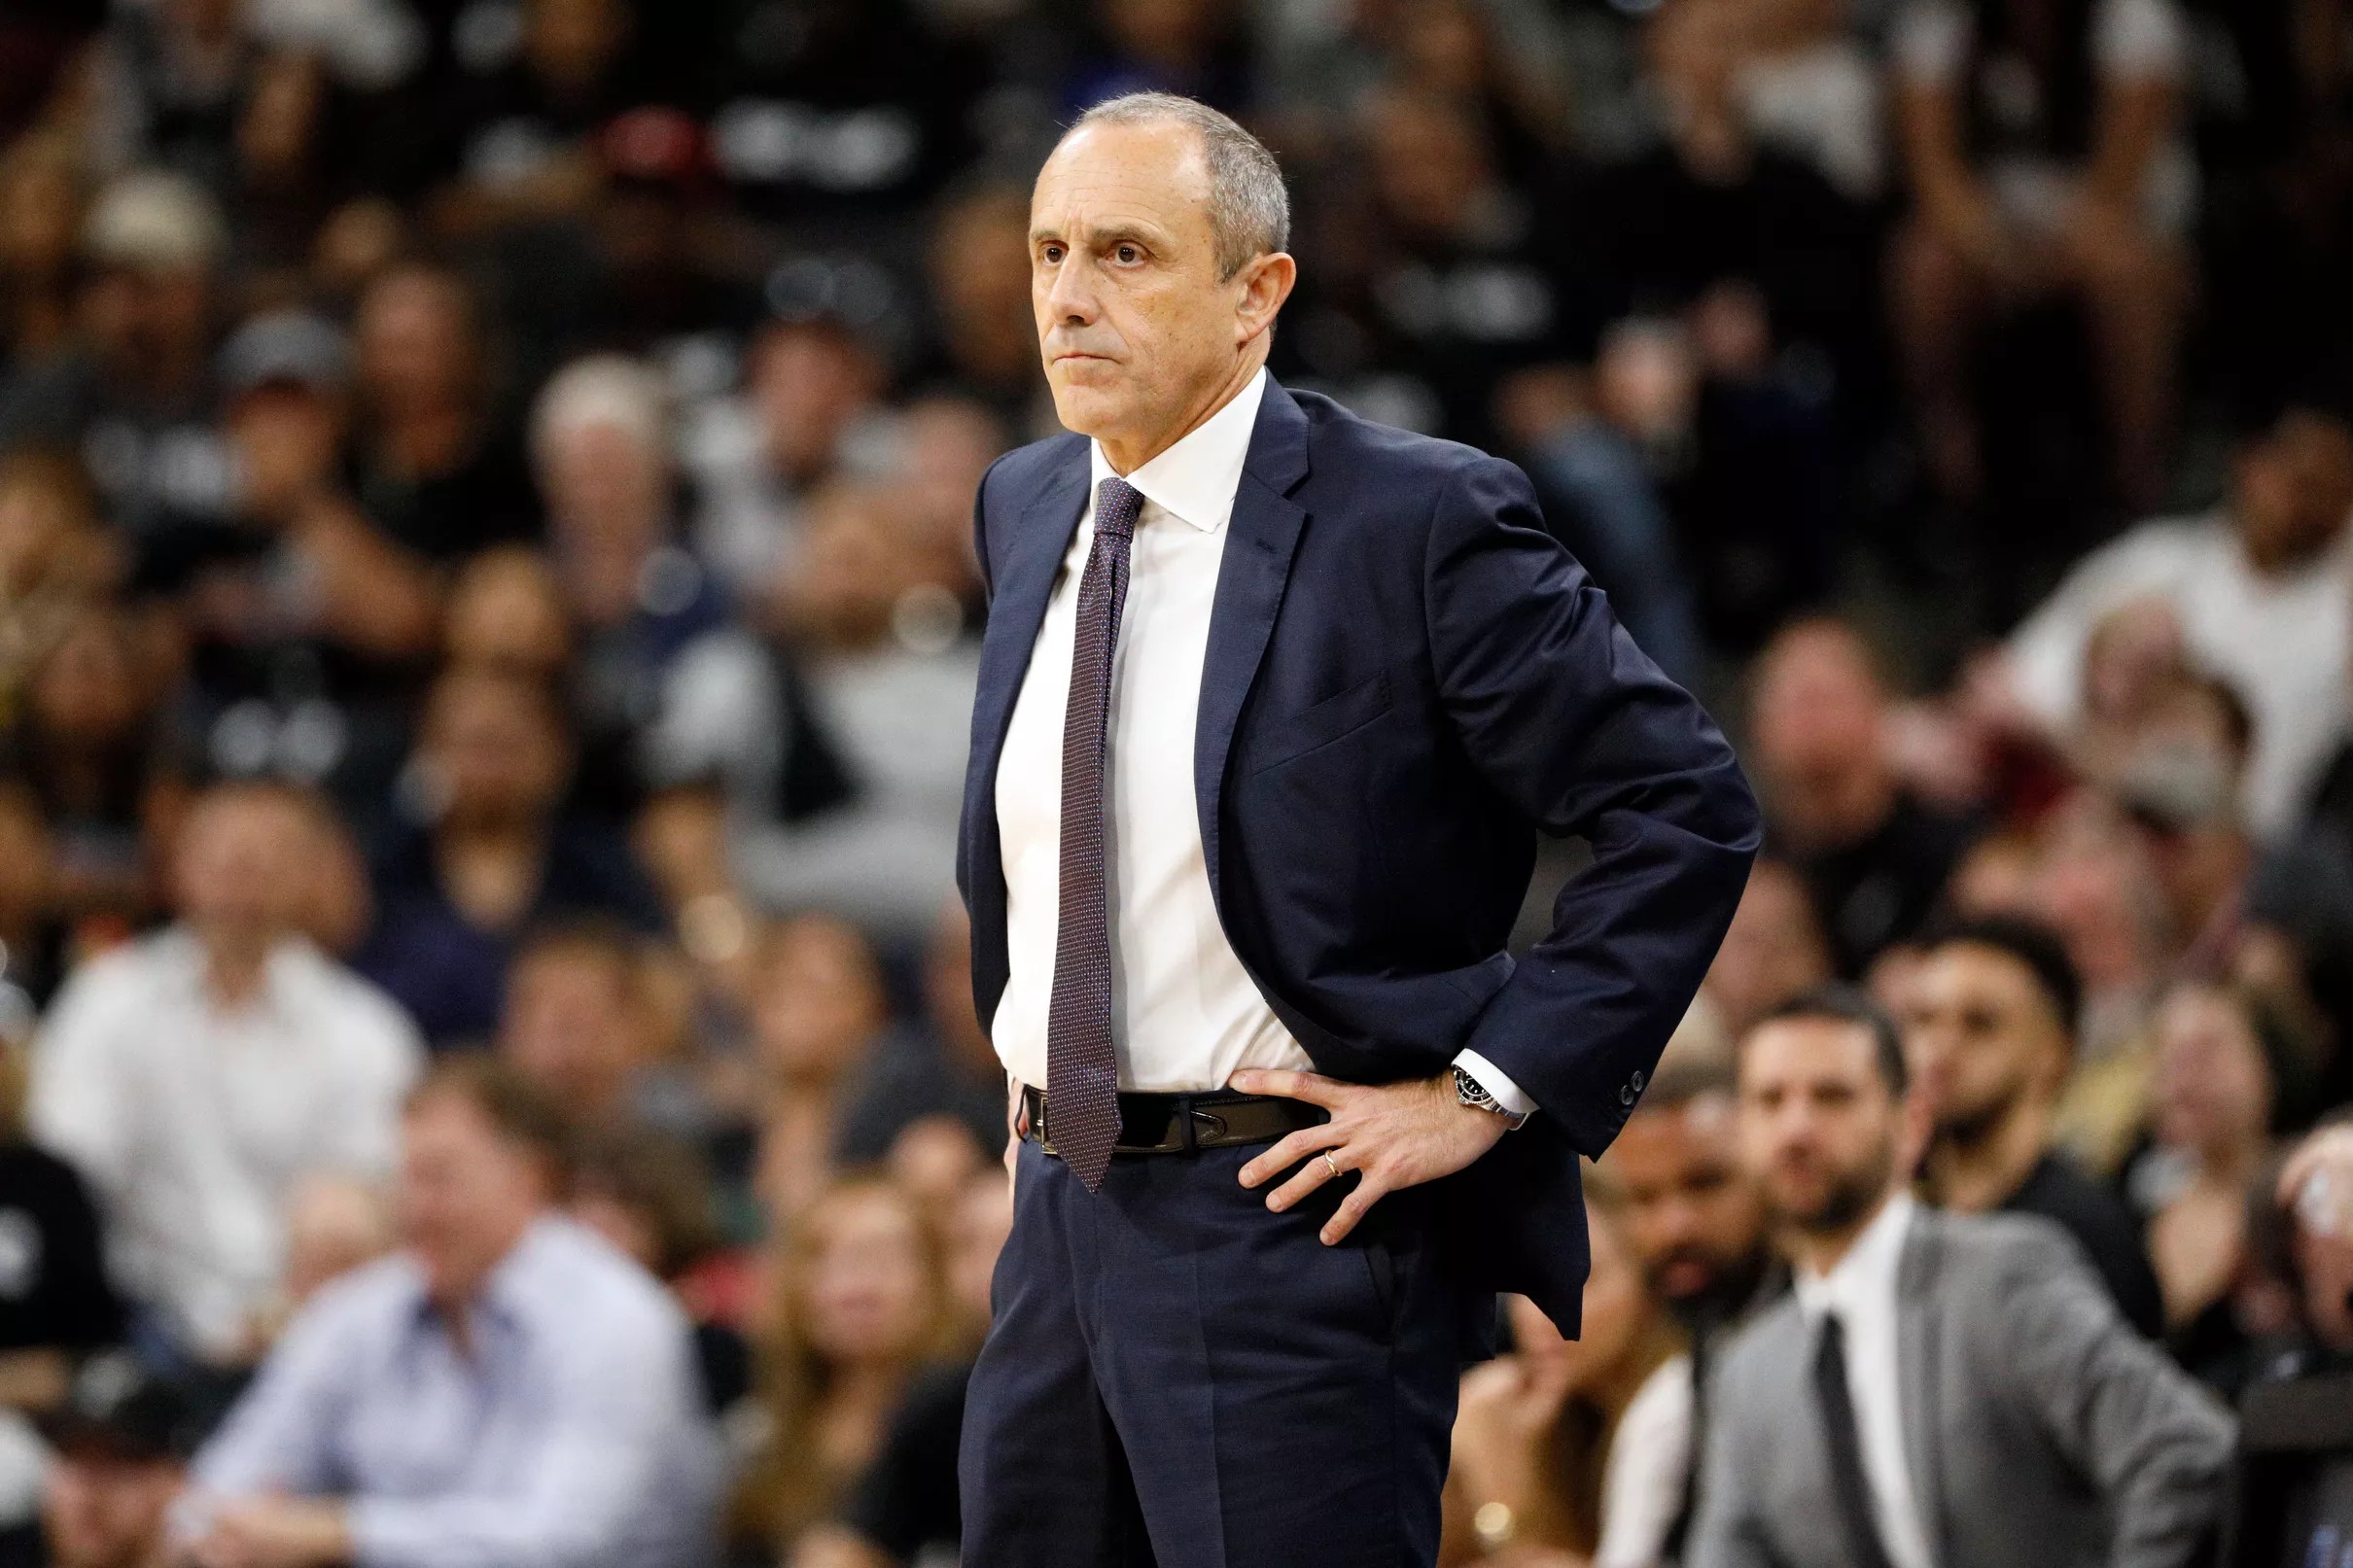 Inside look at Spurs assistant coach Ettore Messina